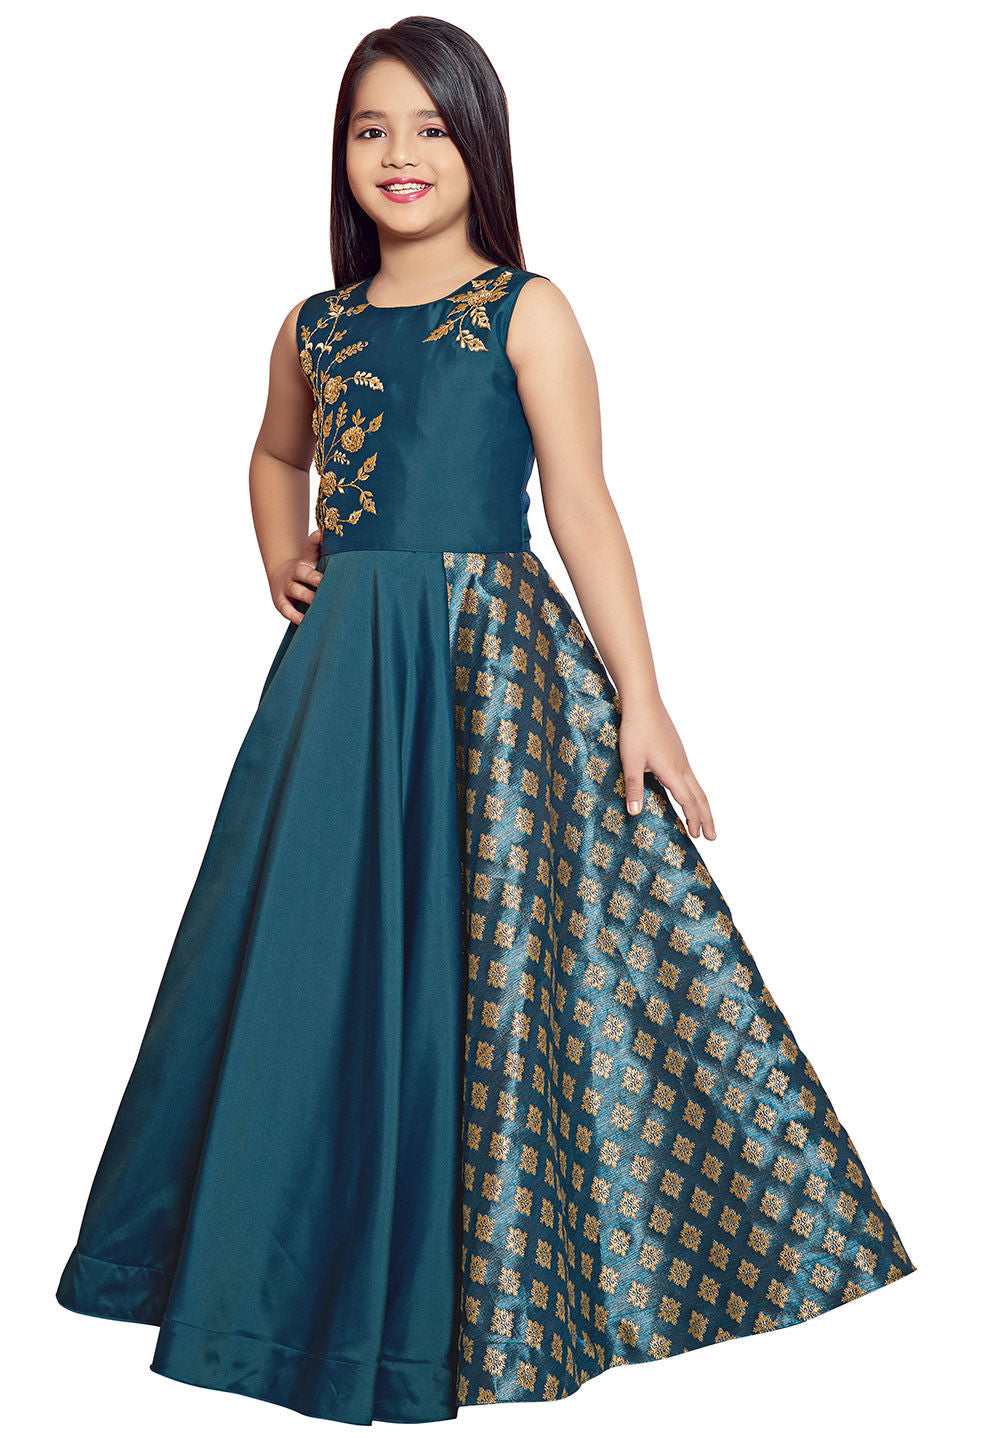 Embroidered Art Silk A Line Gown in Teal Blue